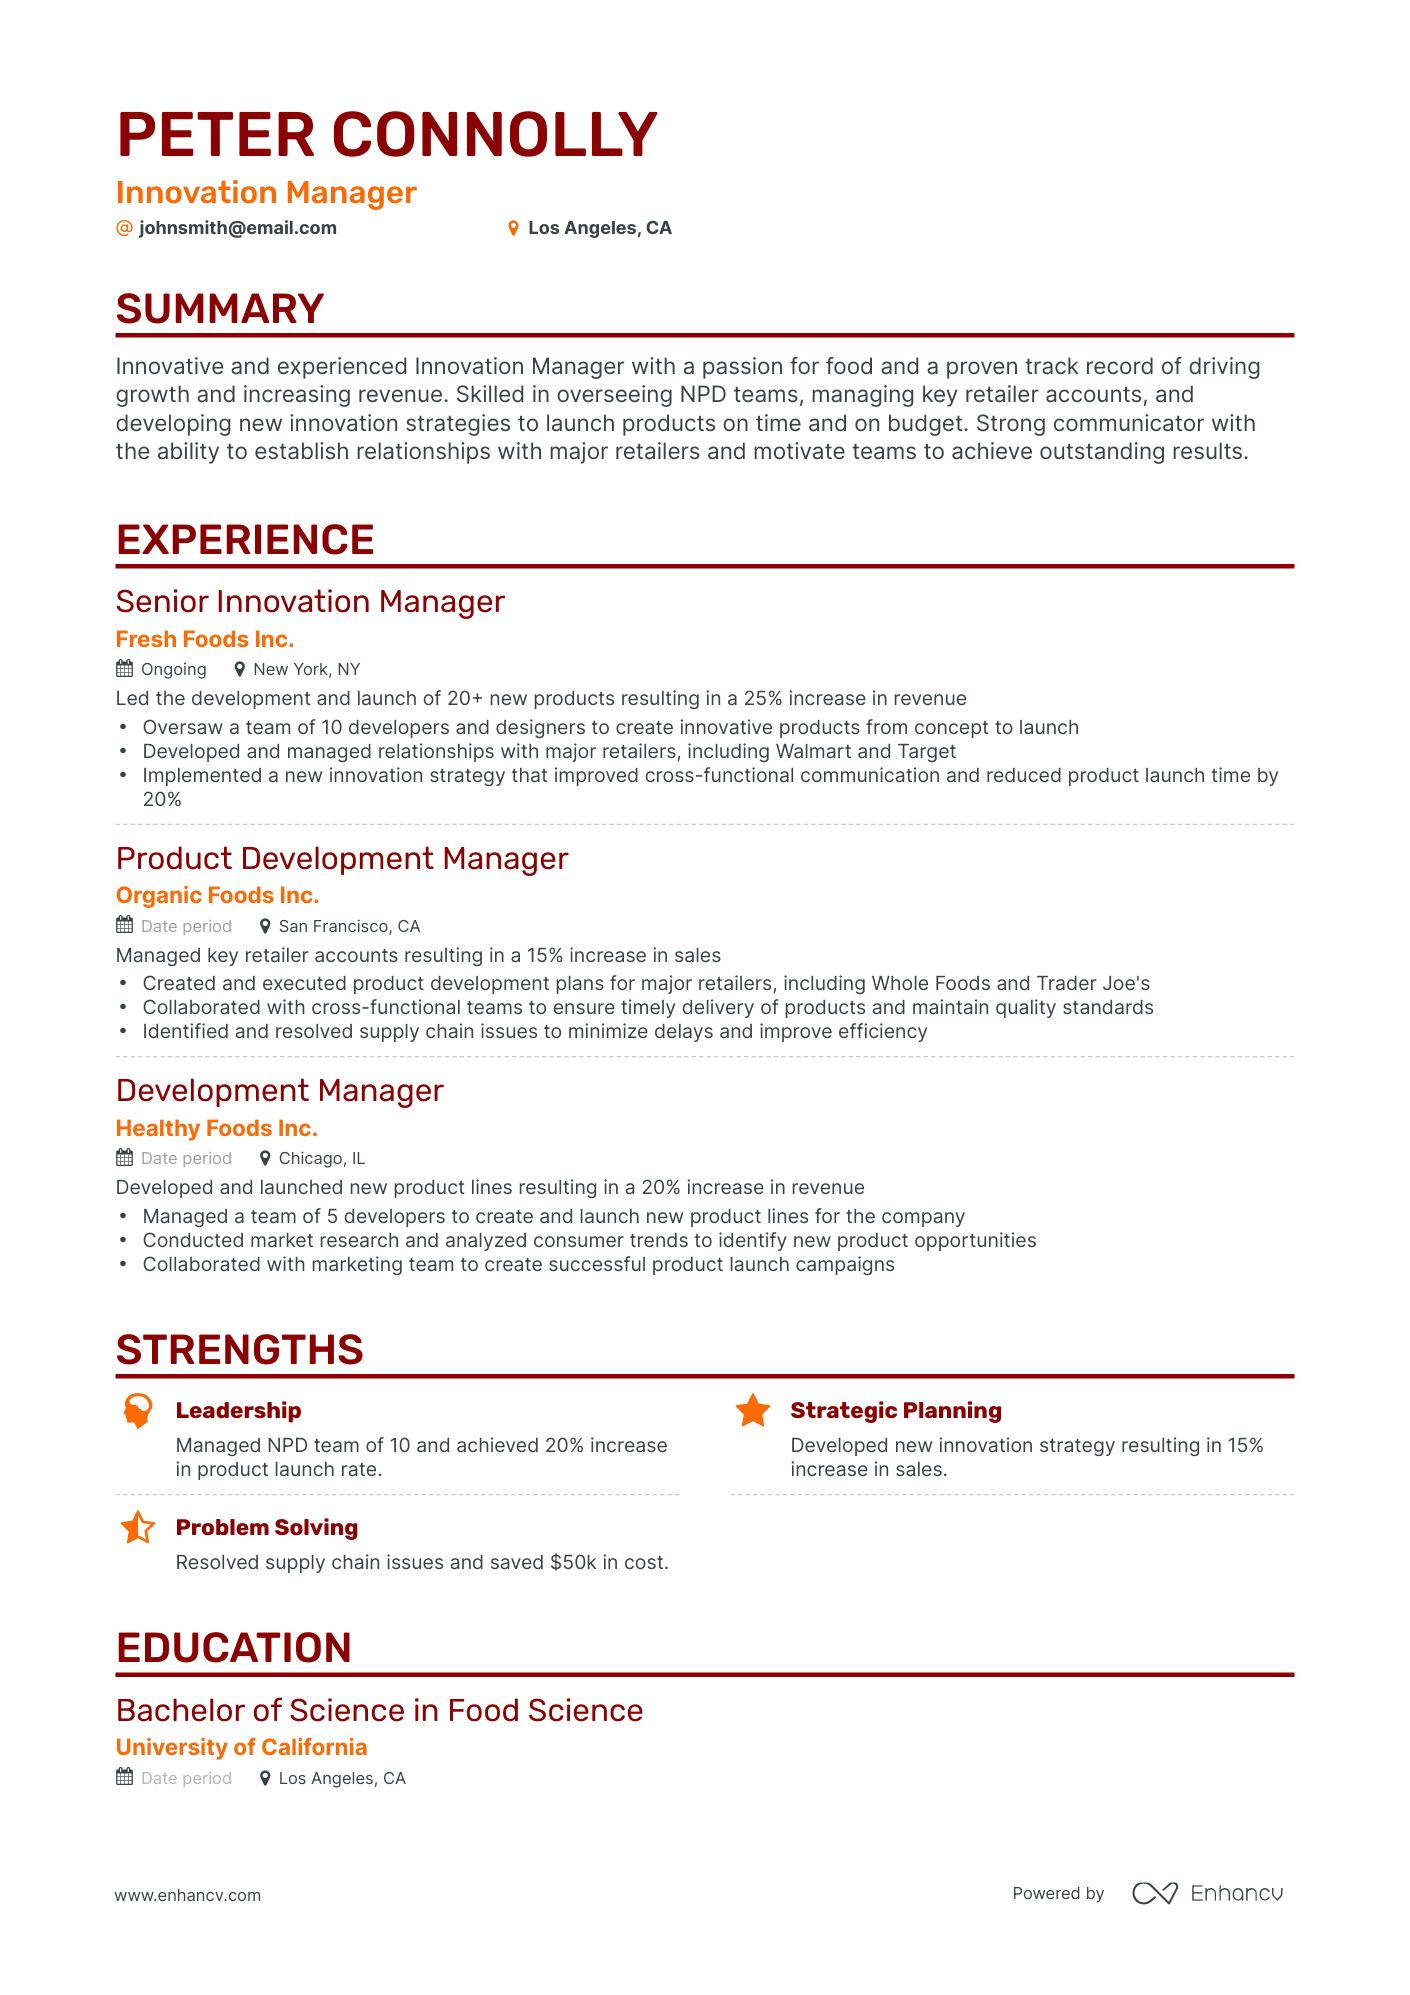 Classic Innovation Manager Resume Template